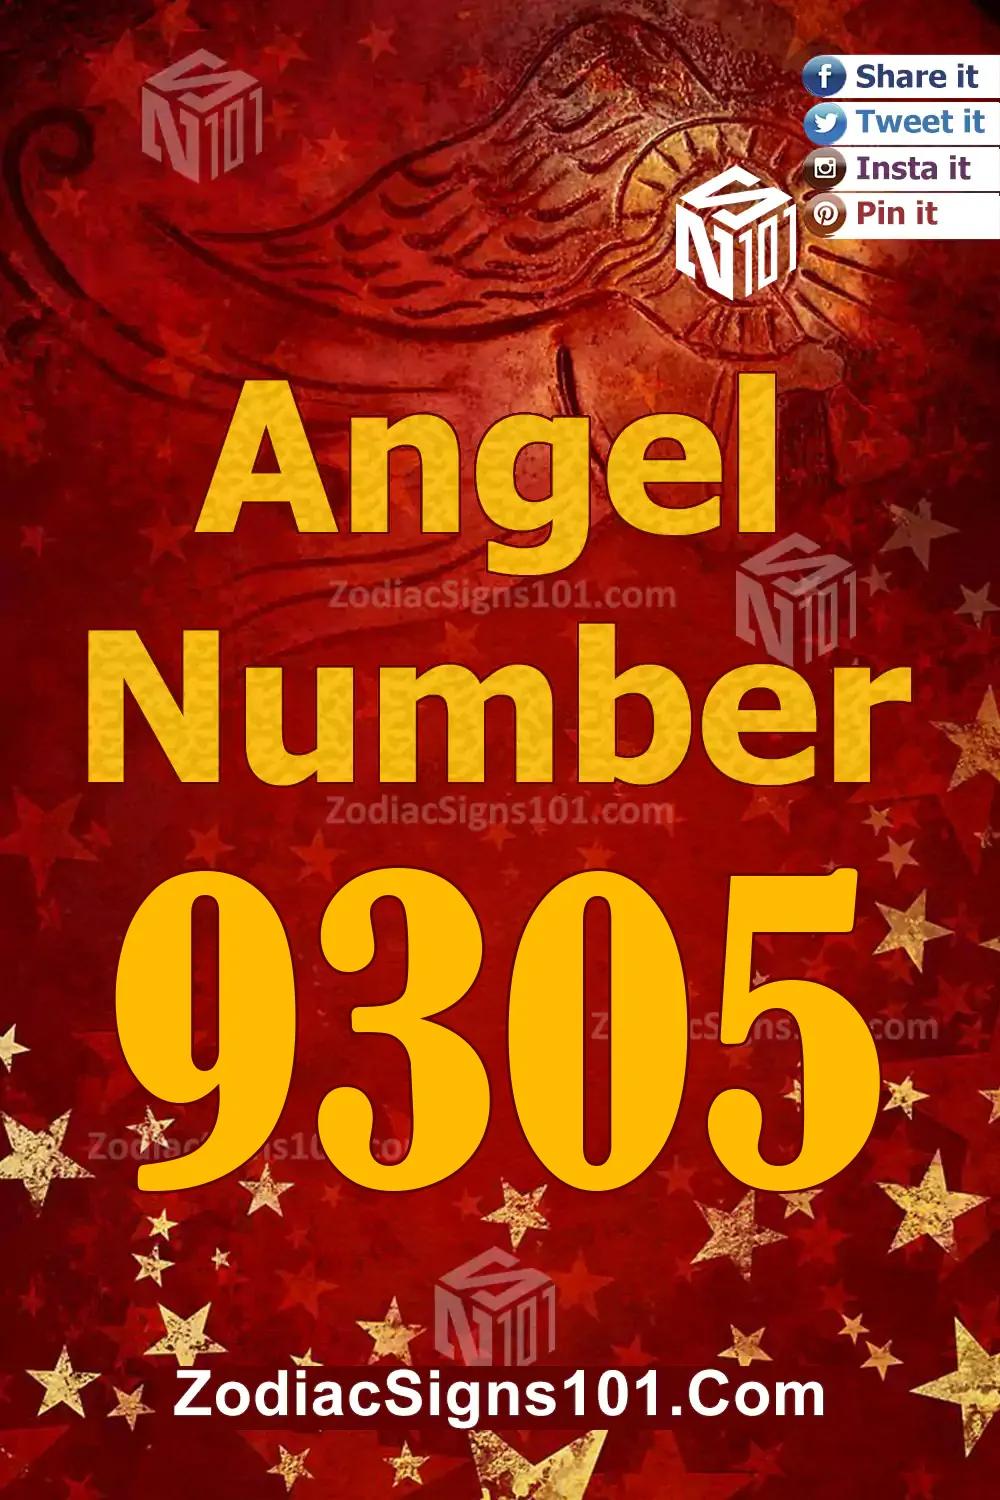 9305 Angel Number Meaning